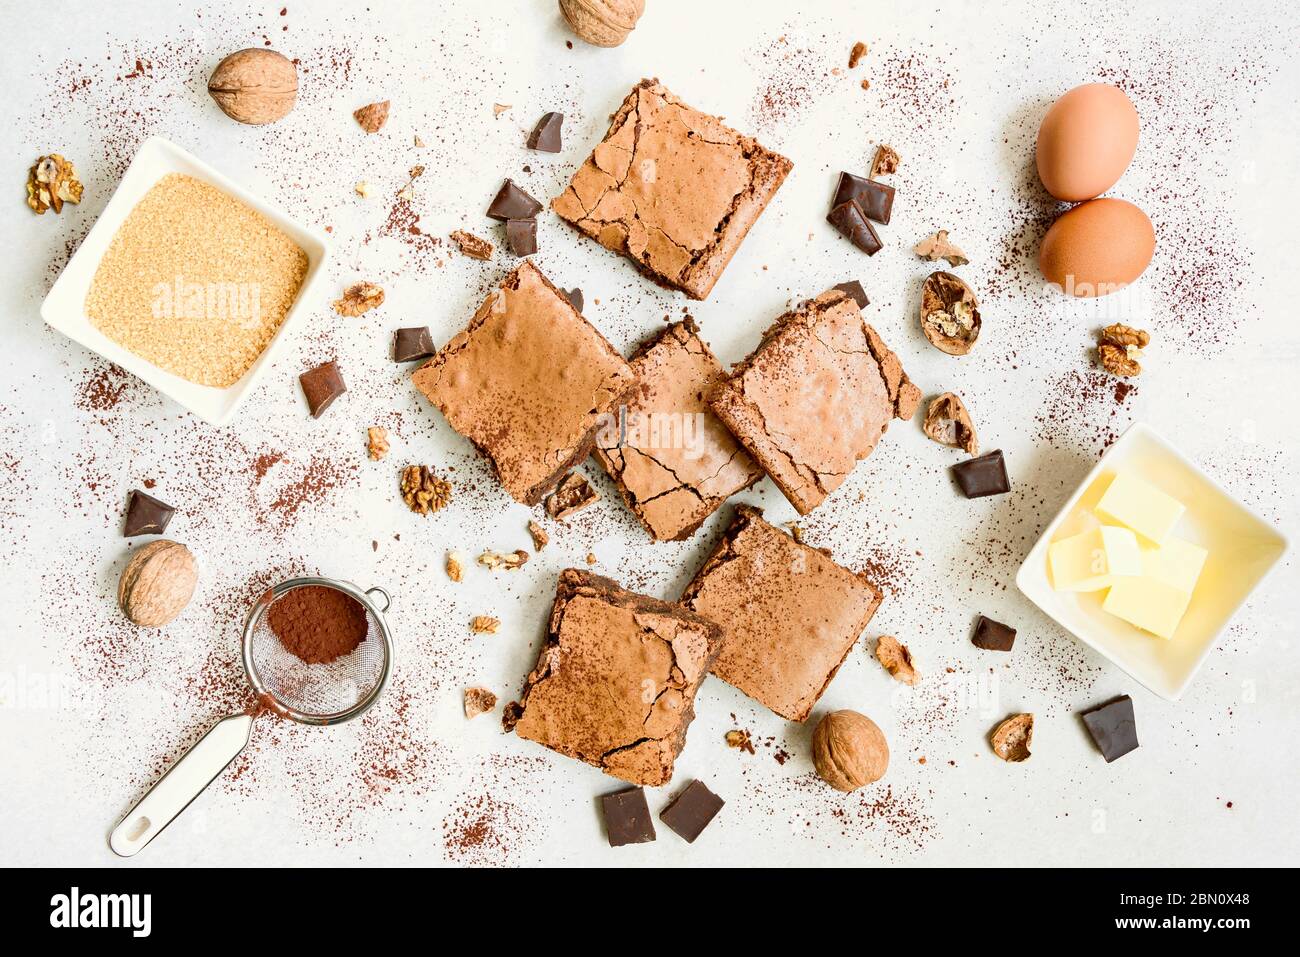 Top view of freshly baked home made brownie cake arranged with recipe ingredients over white rustic background. Stock Photo